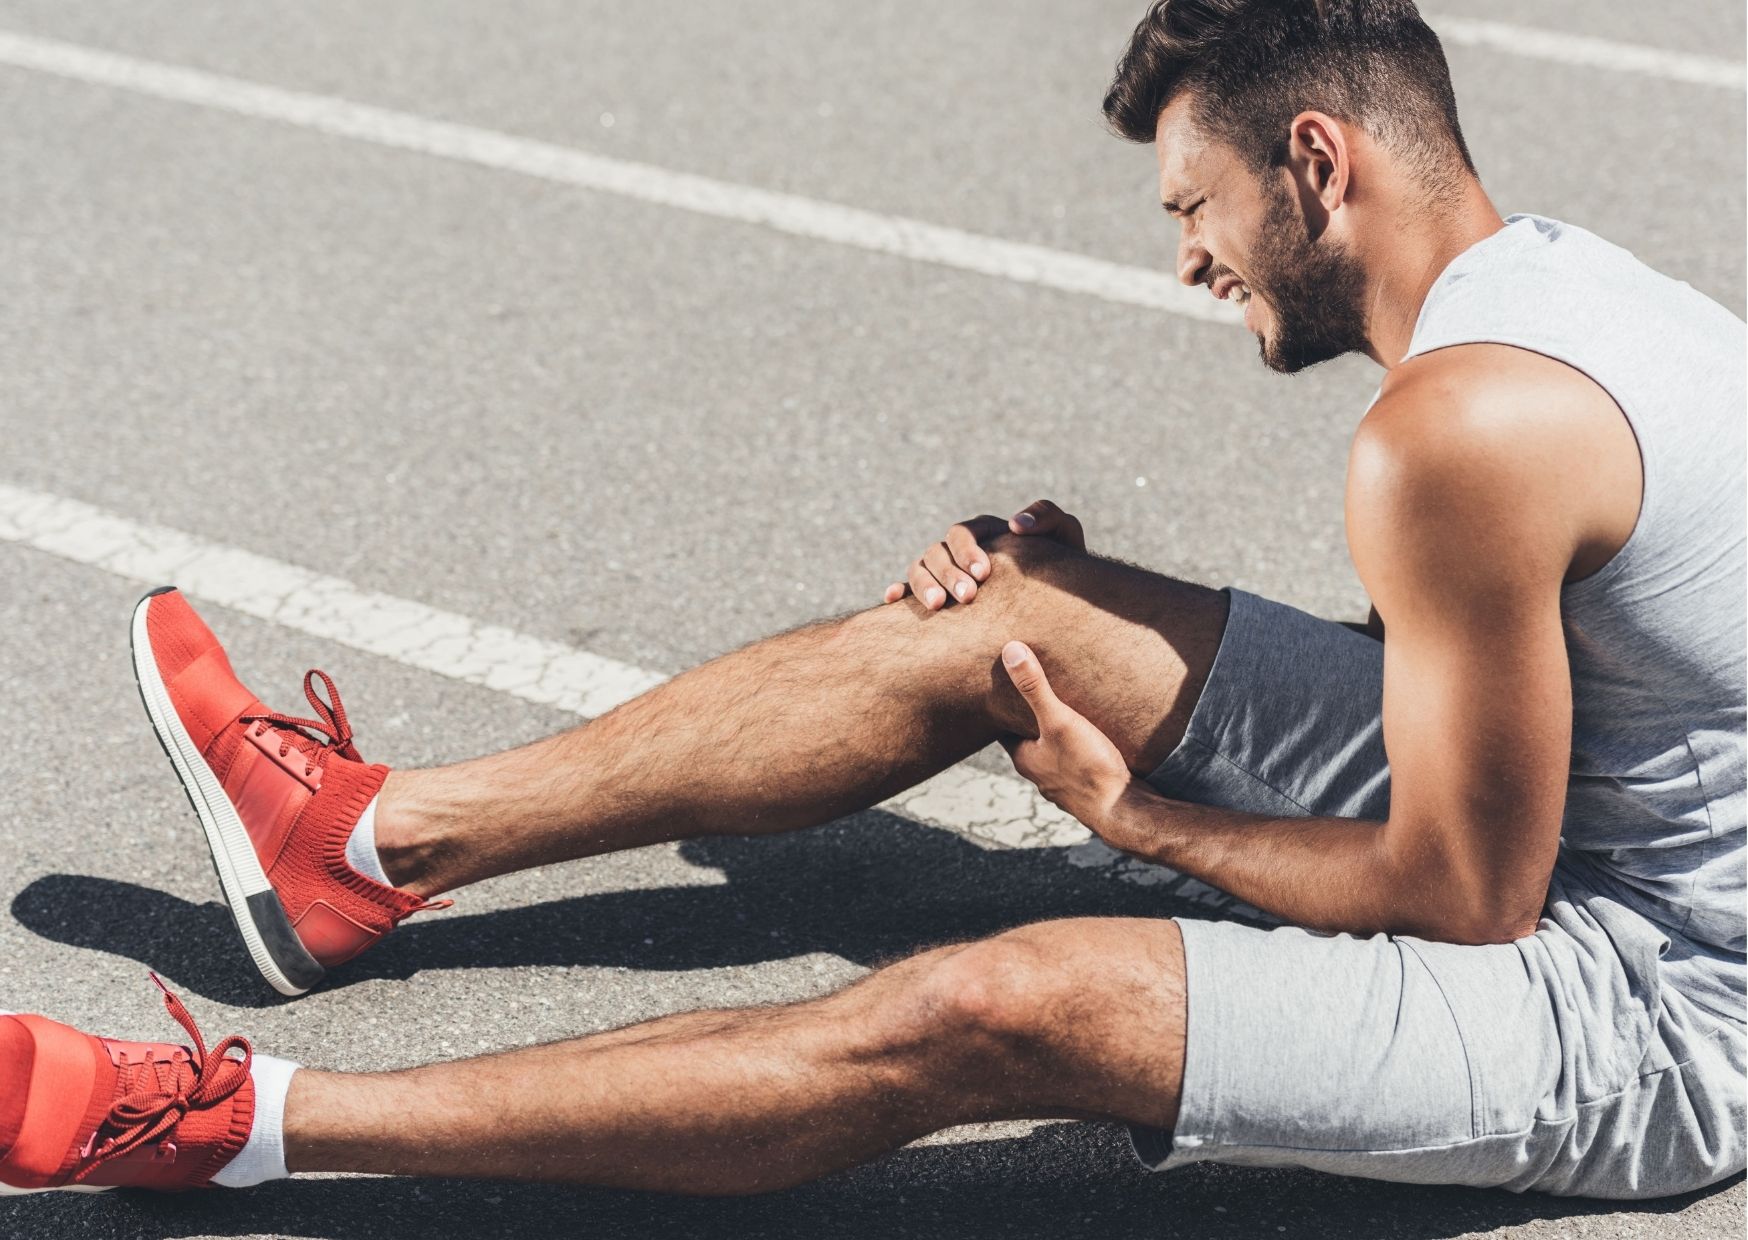 Running injuries can be prevented with regular strength training